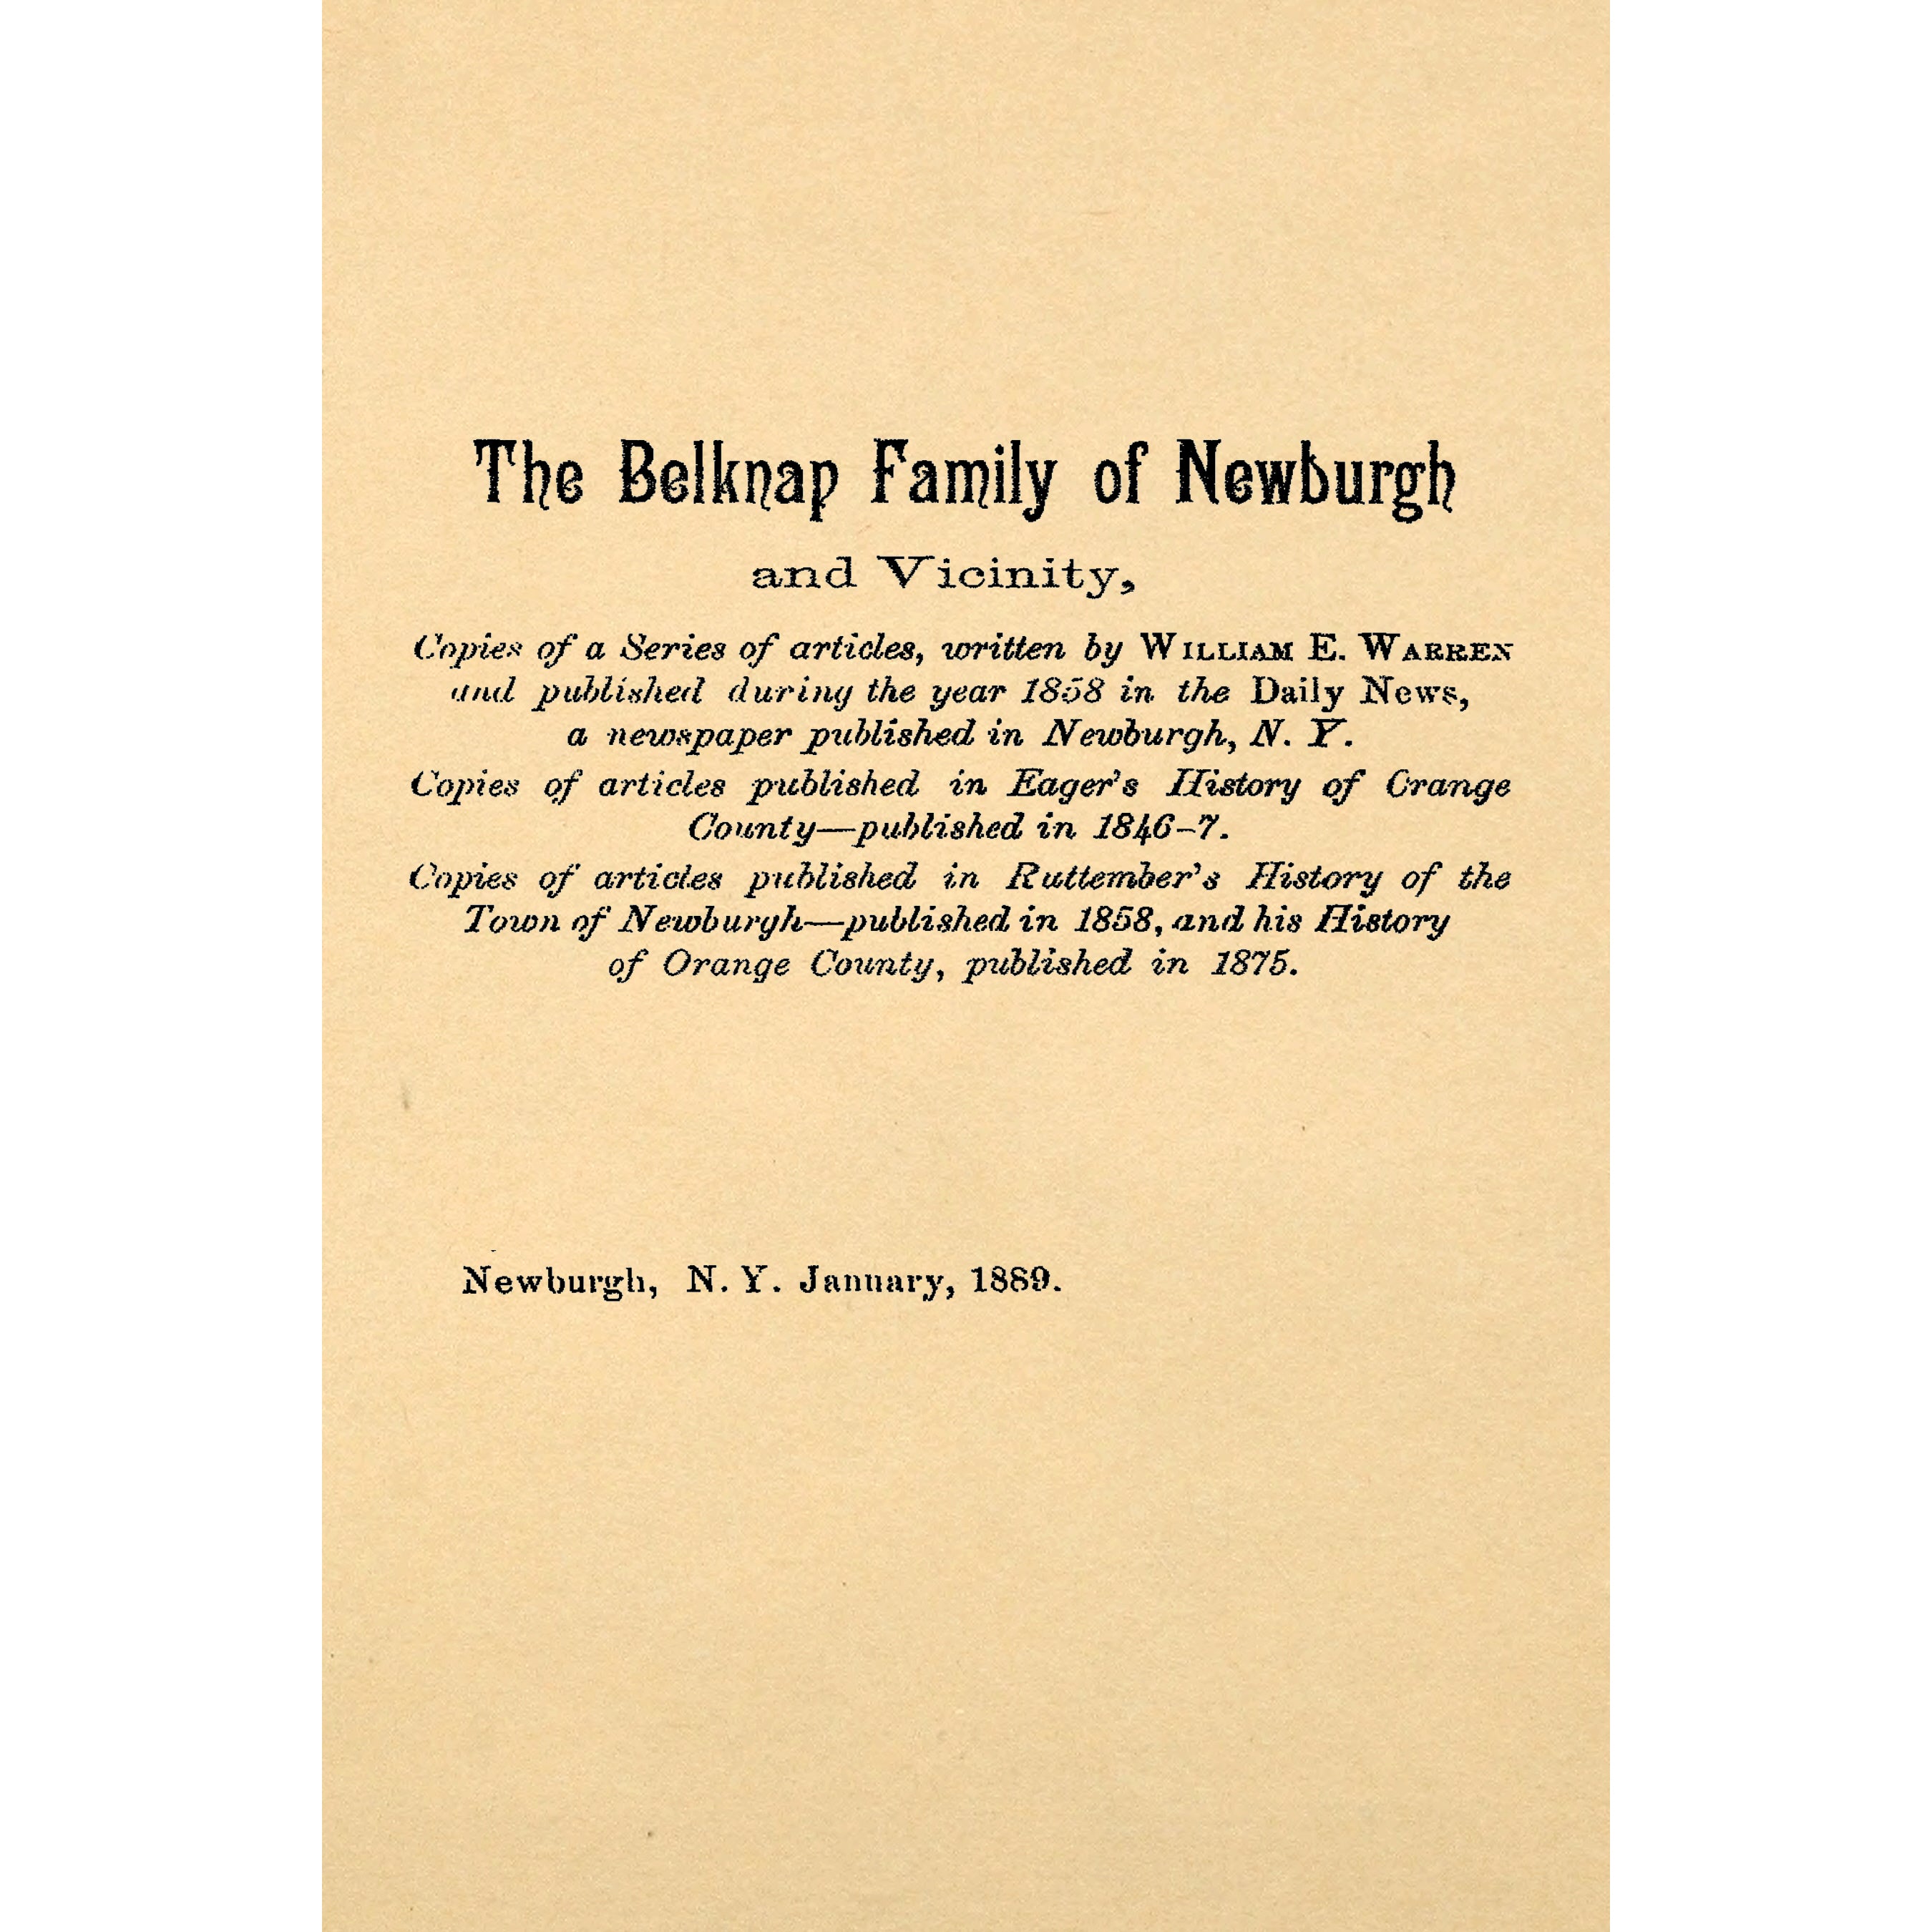 The Belknap Family of Newburgh and Vicinity